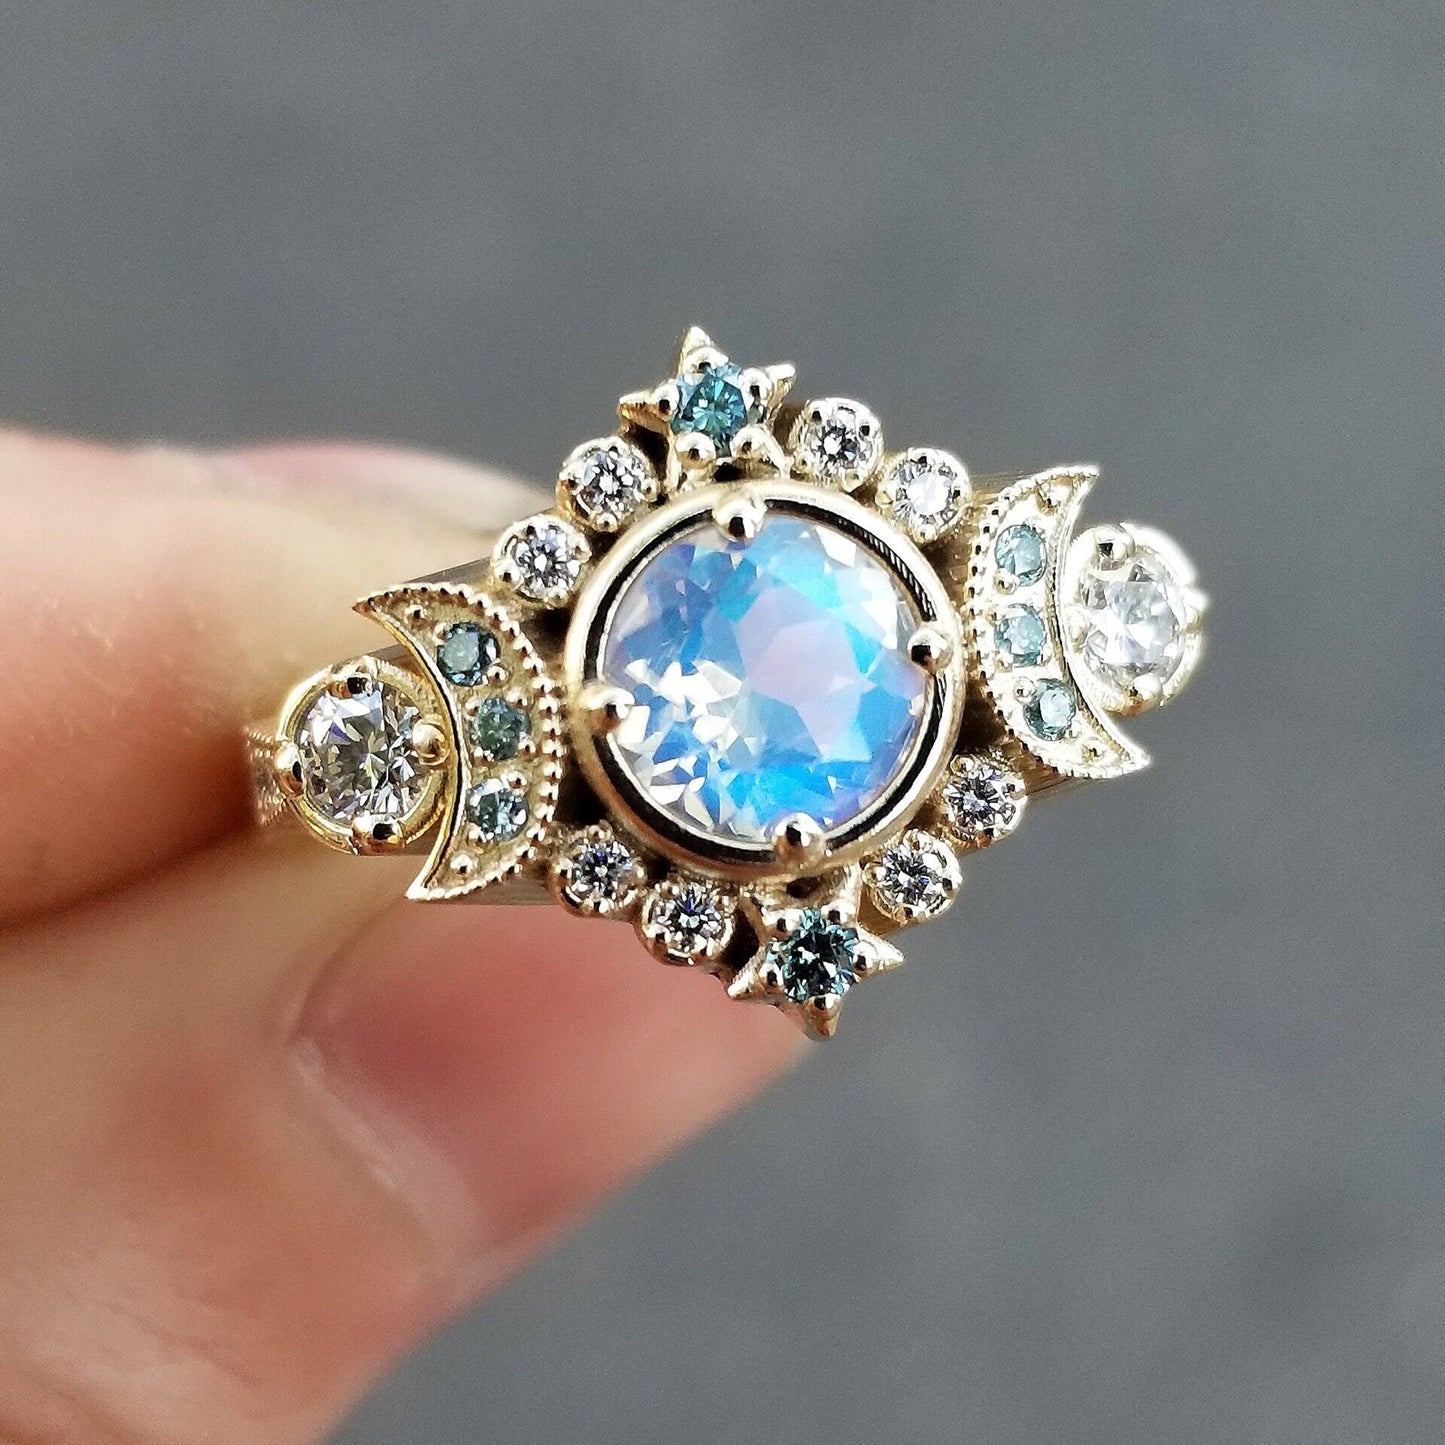 Load image into Gallery viewer, Selene Moon Goddess Ring - Moonstone with Blue and White Diamonds - 14k Yellow Gold
